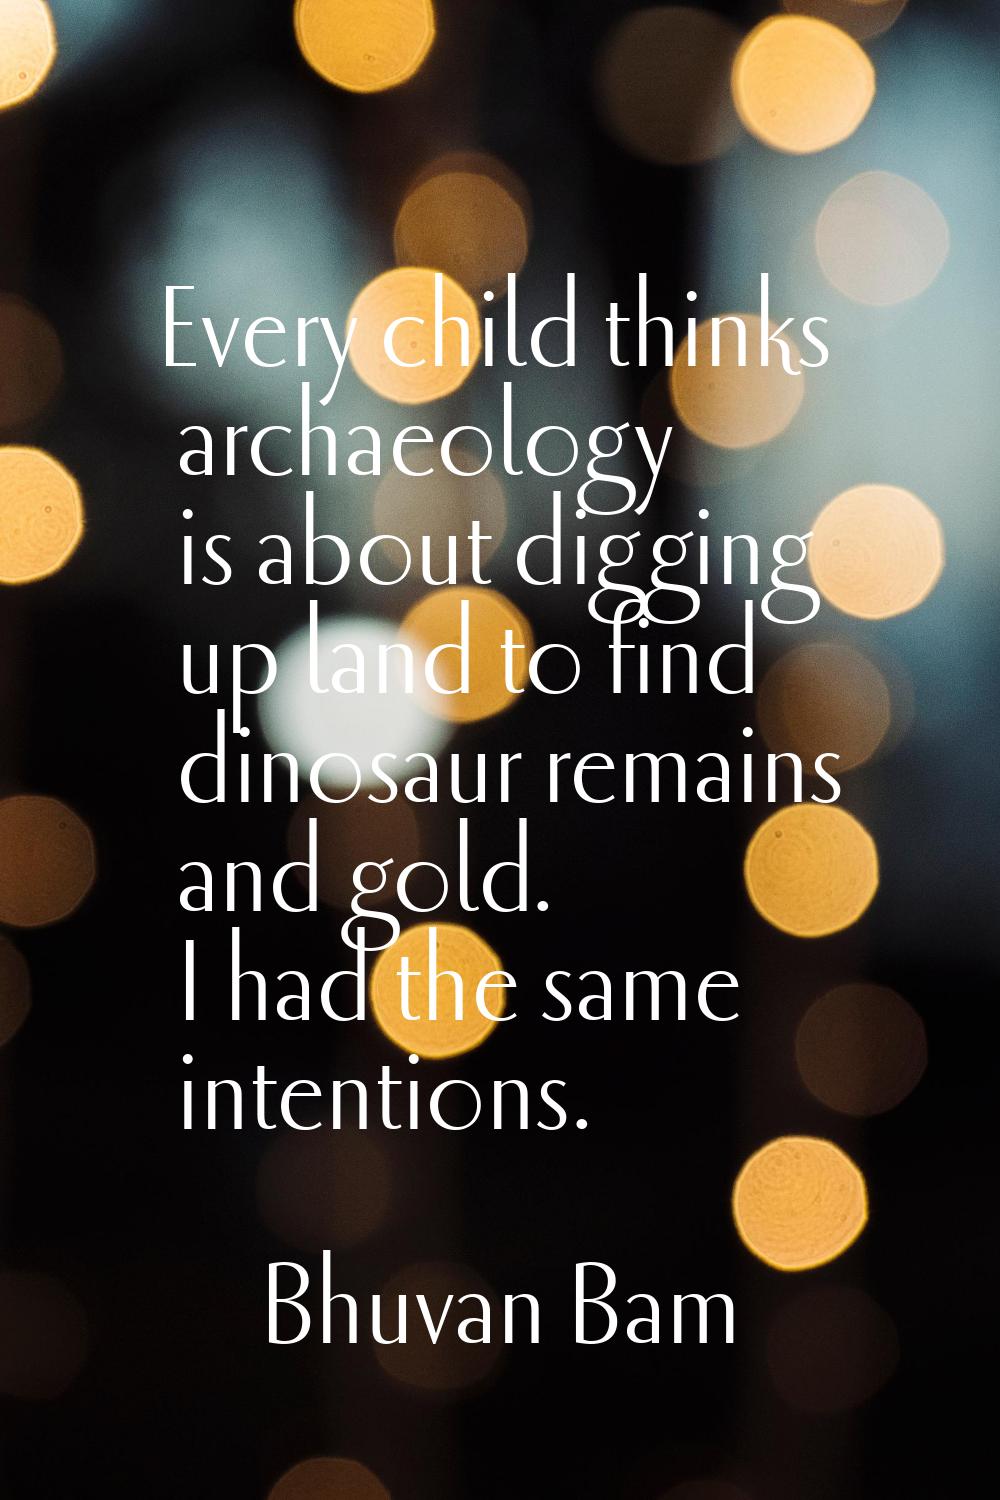 Every child thinks archaeology is about digging up land to find dinosaur remains and gold. I had th